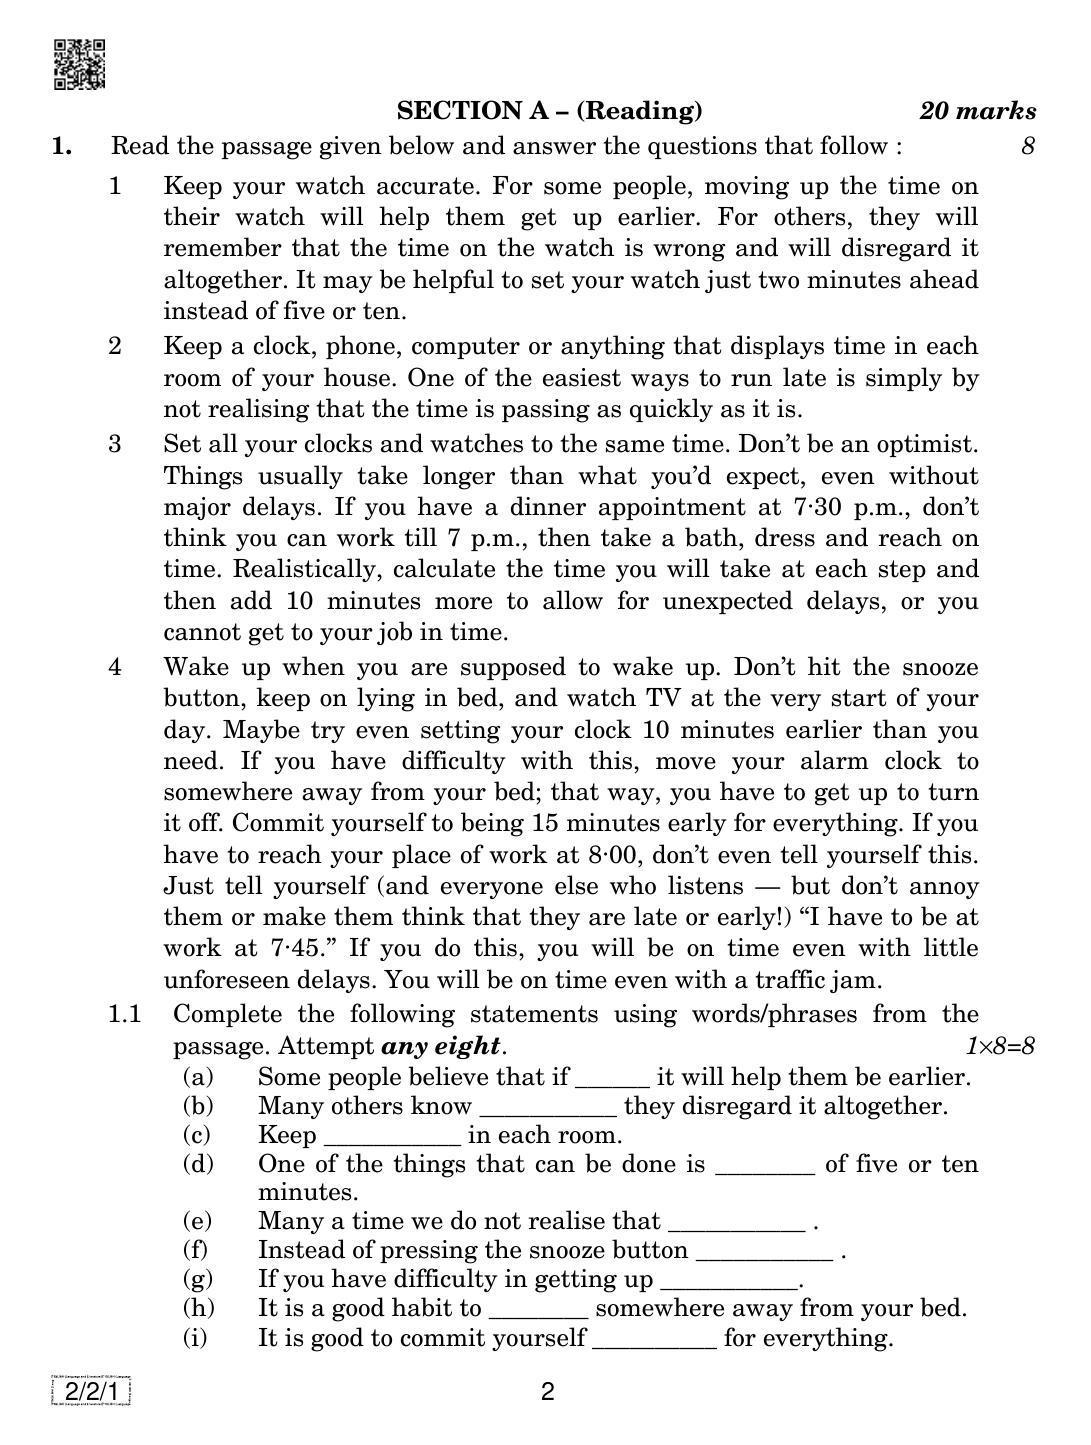 CBSE Class 10 2-2-1 ENGLISH LANGUAGE AND LETERATURE 2019 Question Paper - Page 2